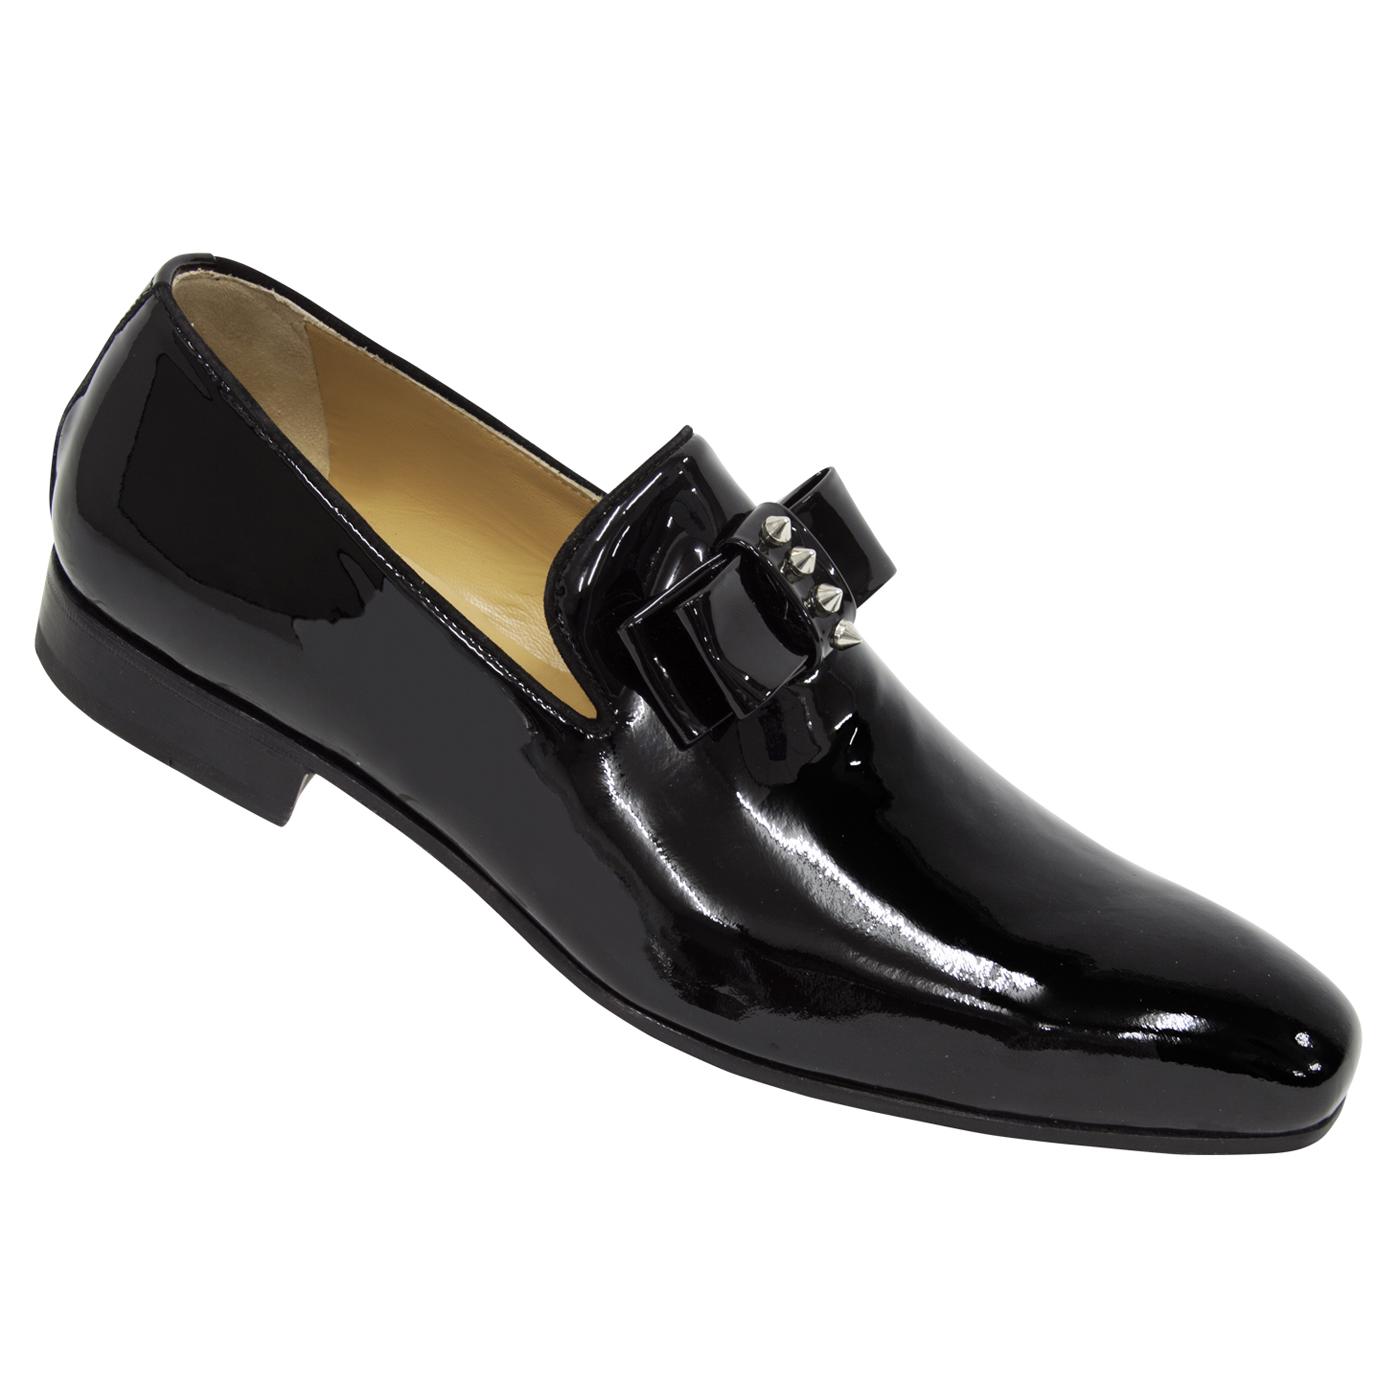 Mauri 4709 Black Genuine Patent Leather Evening Loafer Shoes - $599.90 ...